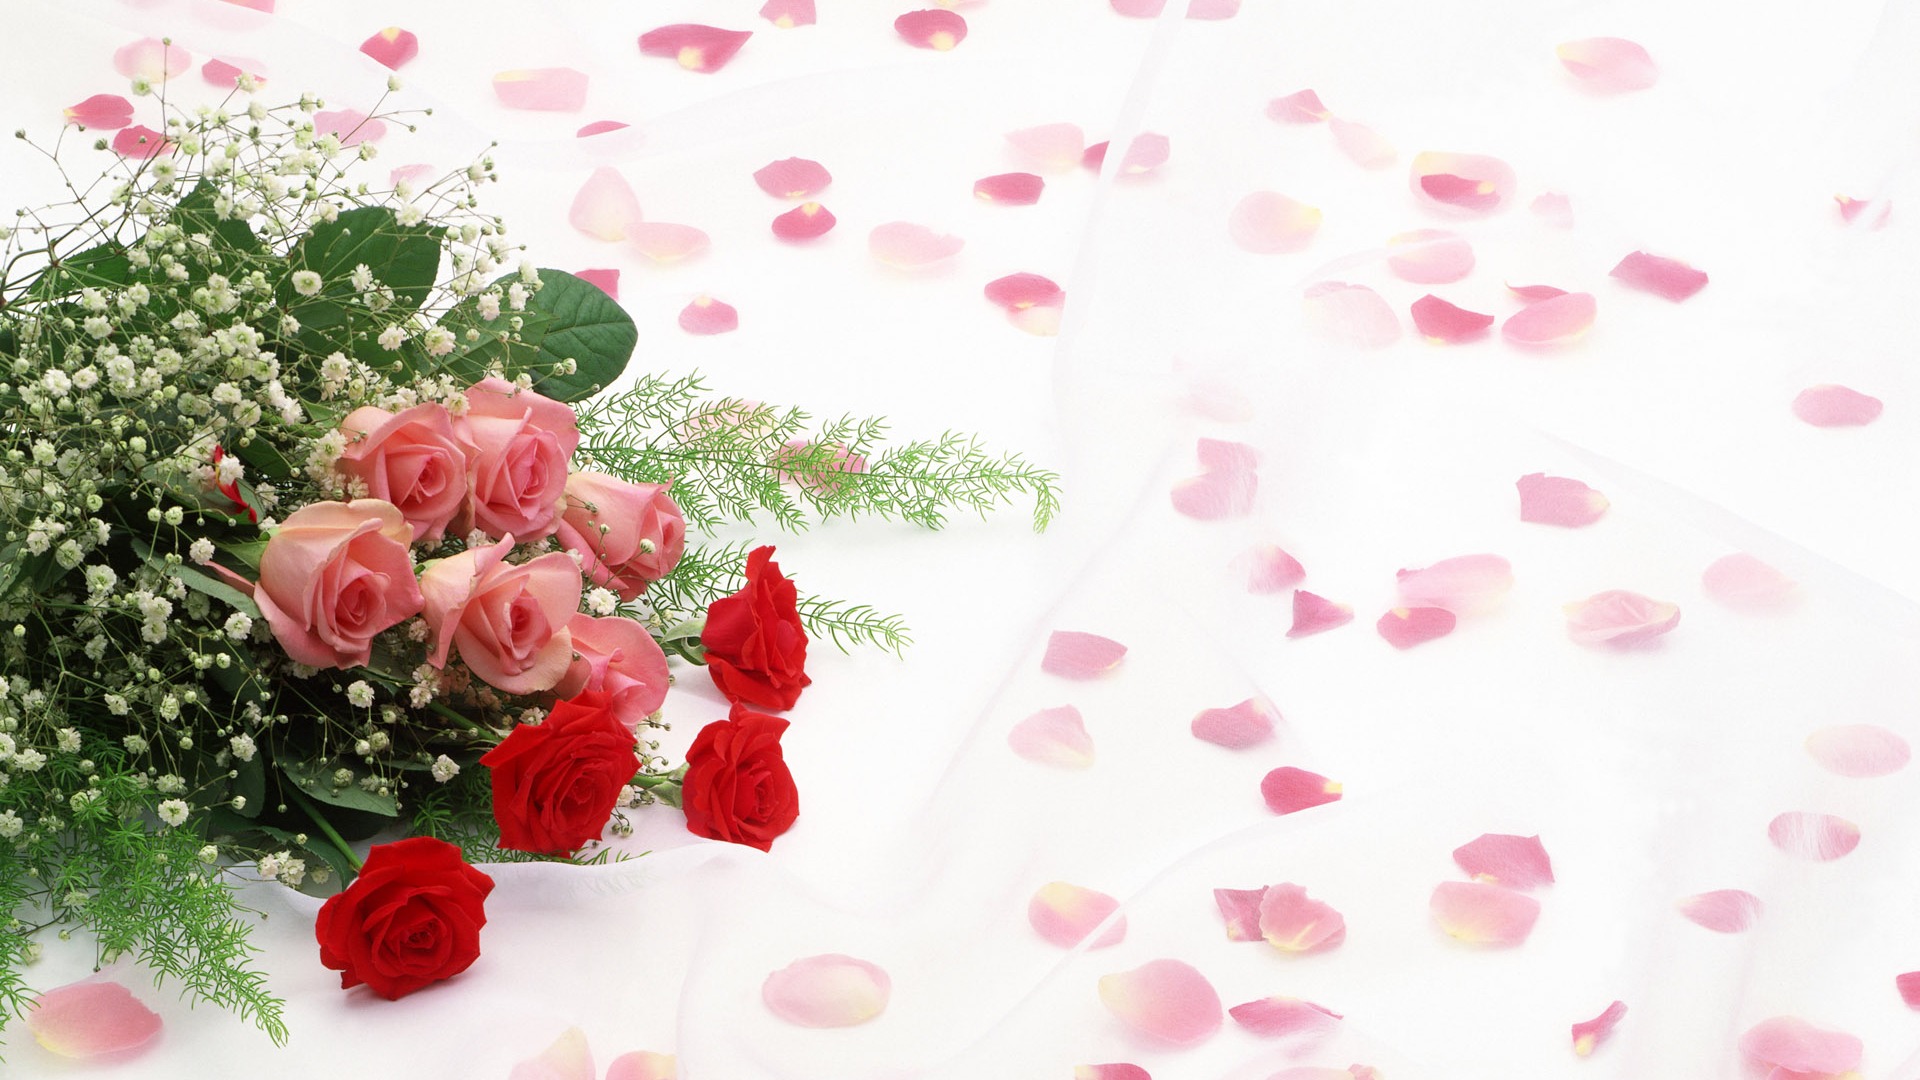 Wedding Flowers items wallpapers (1) #6 - 1920x1080